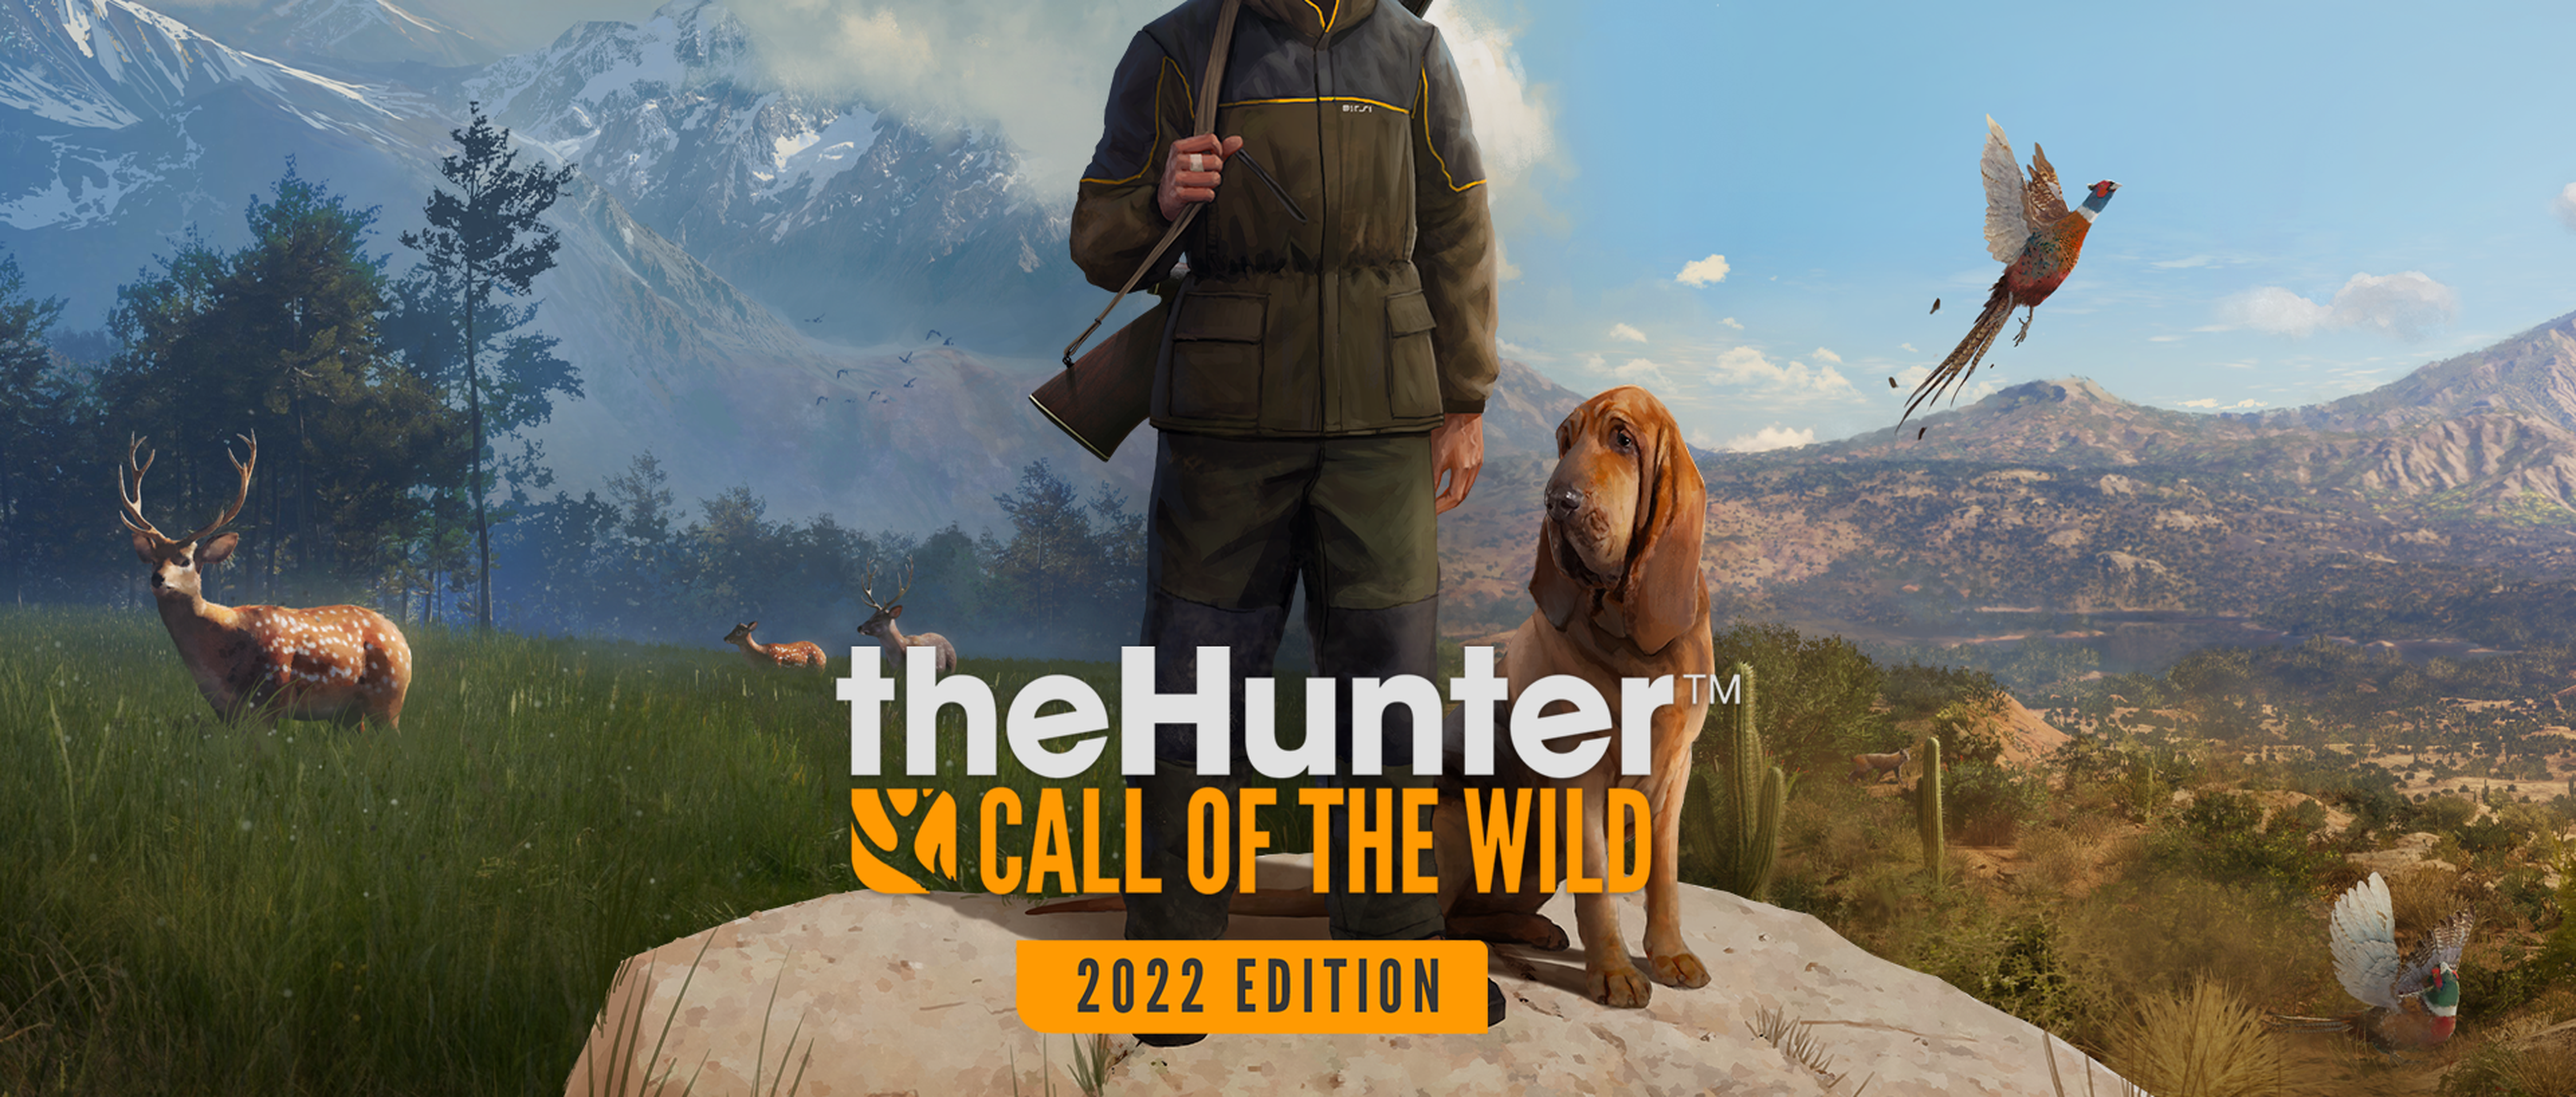 the hunter call of the wild cheat codes ps4